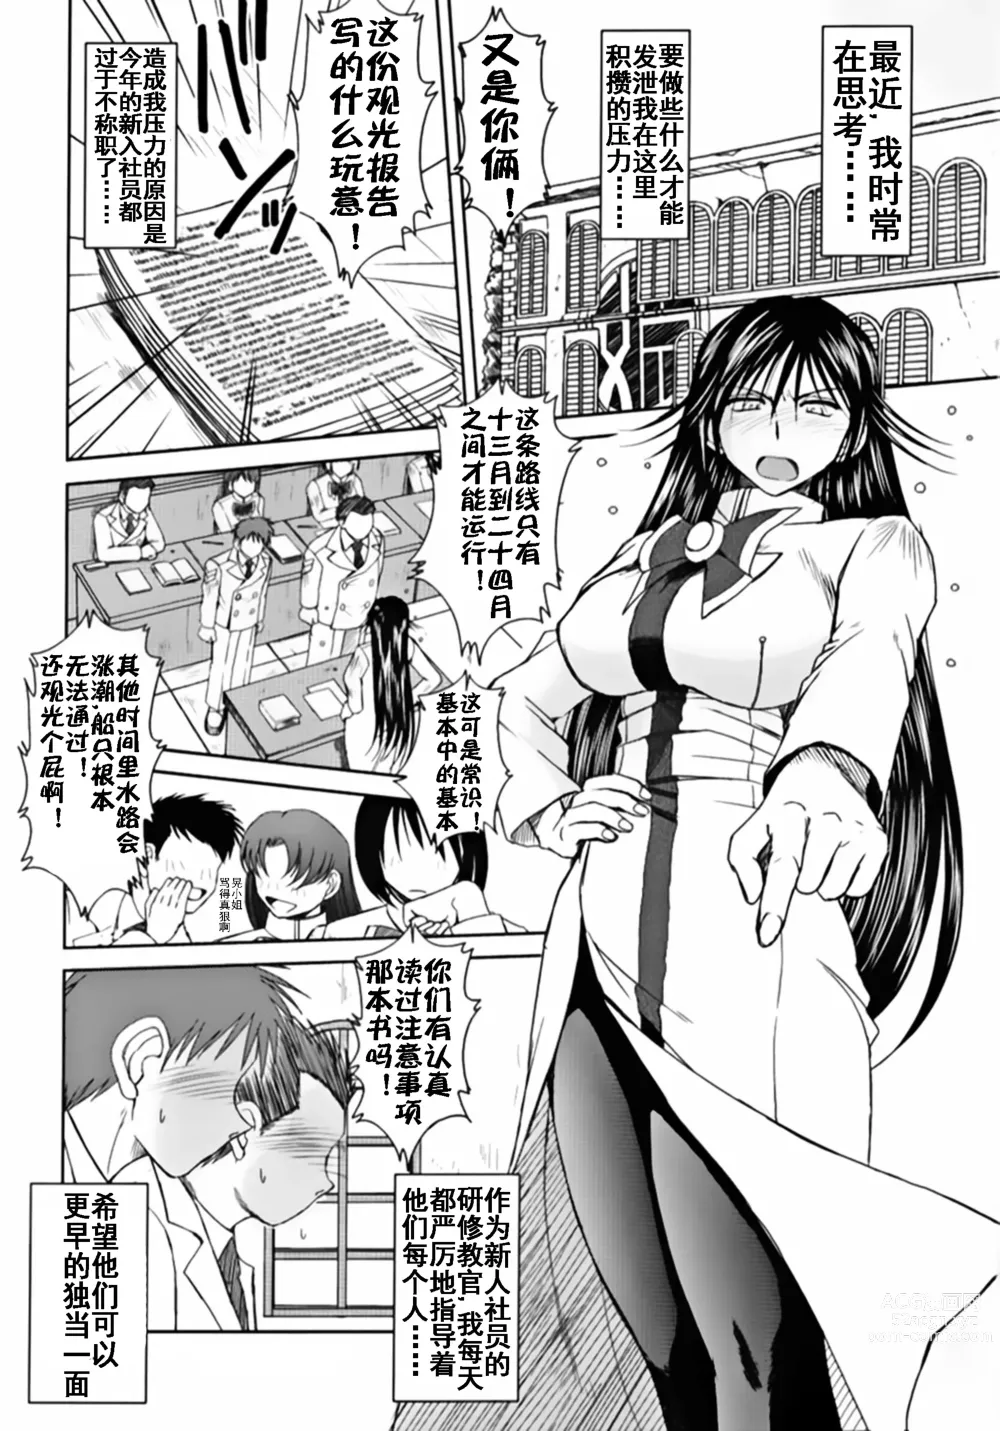 Page 2 of doujinshi 真红蔷薇